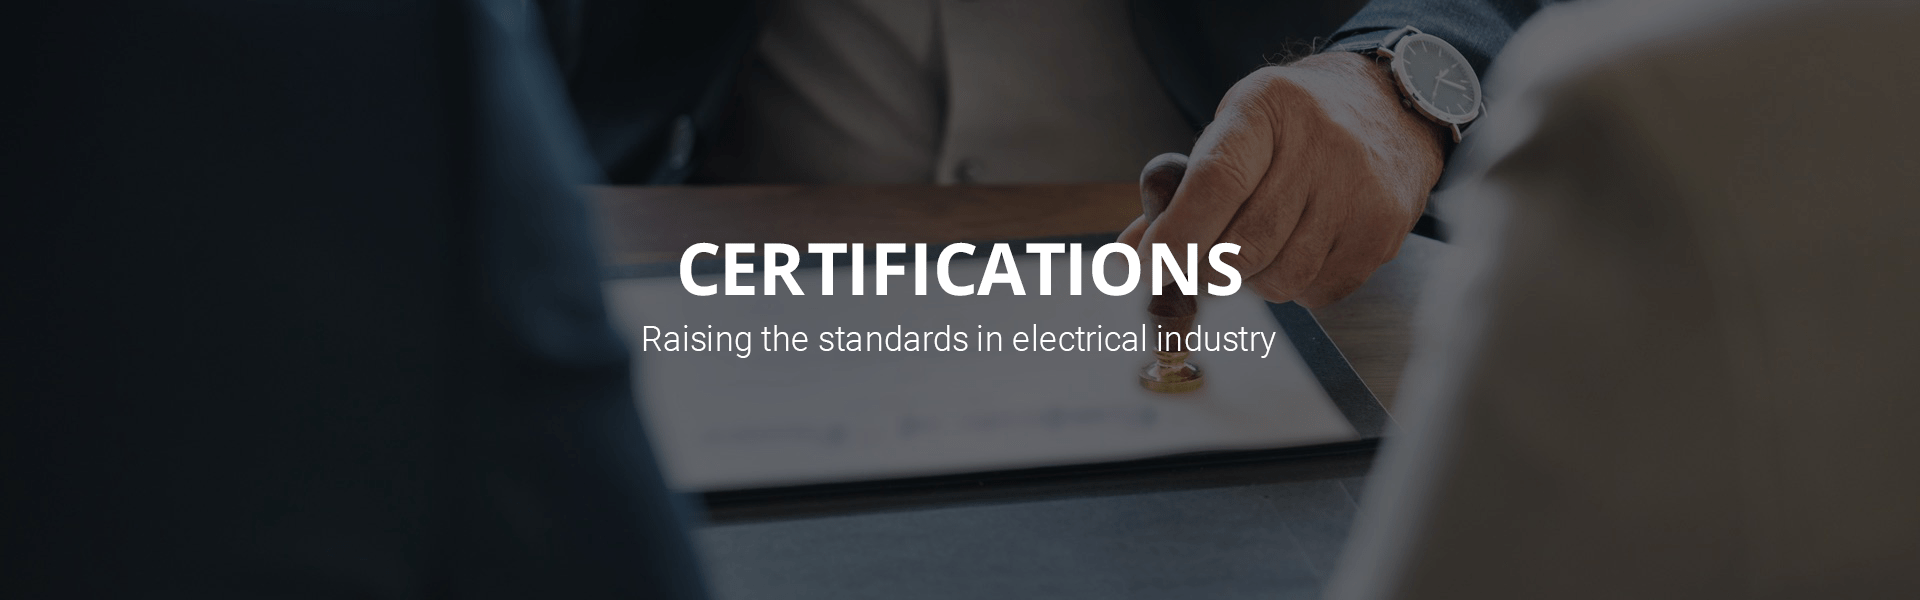 Polycab certifications